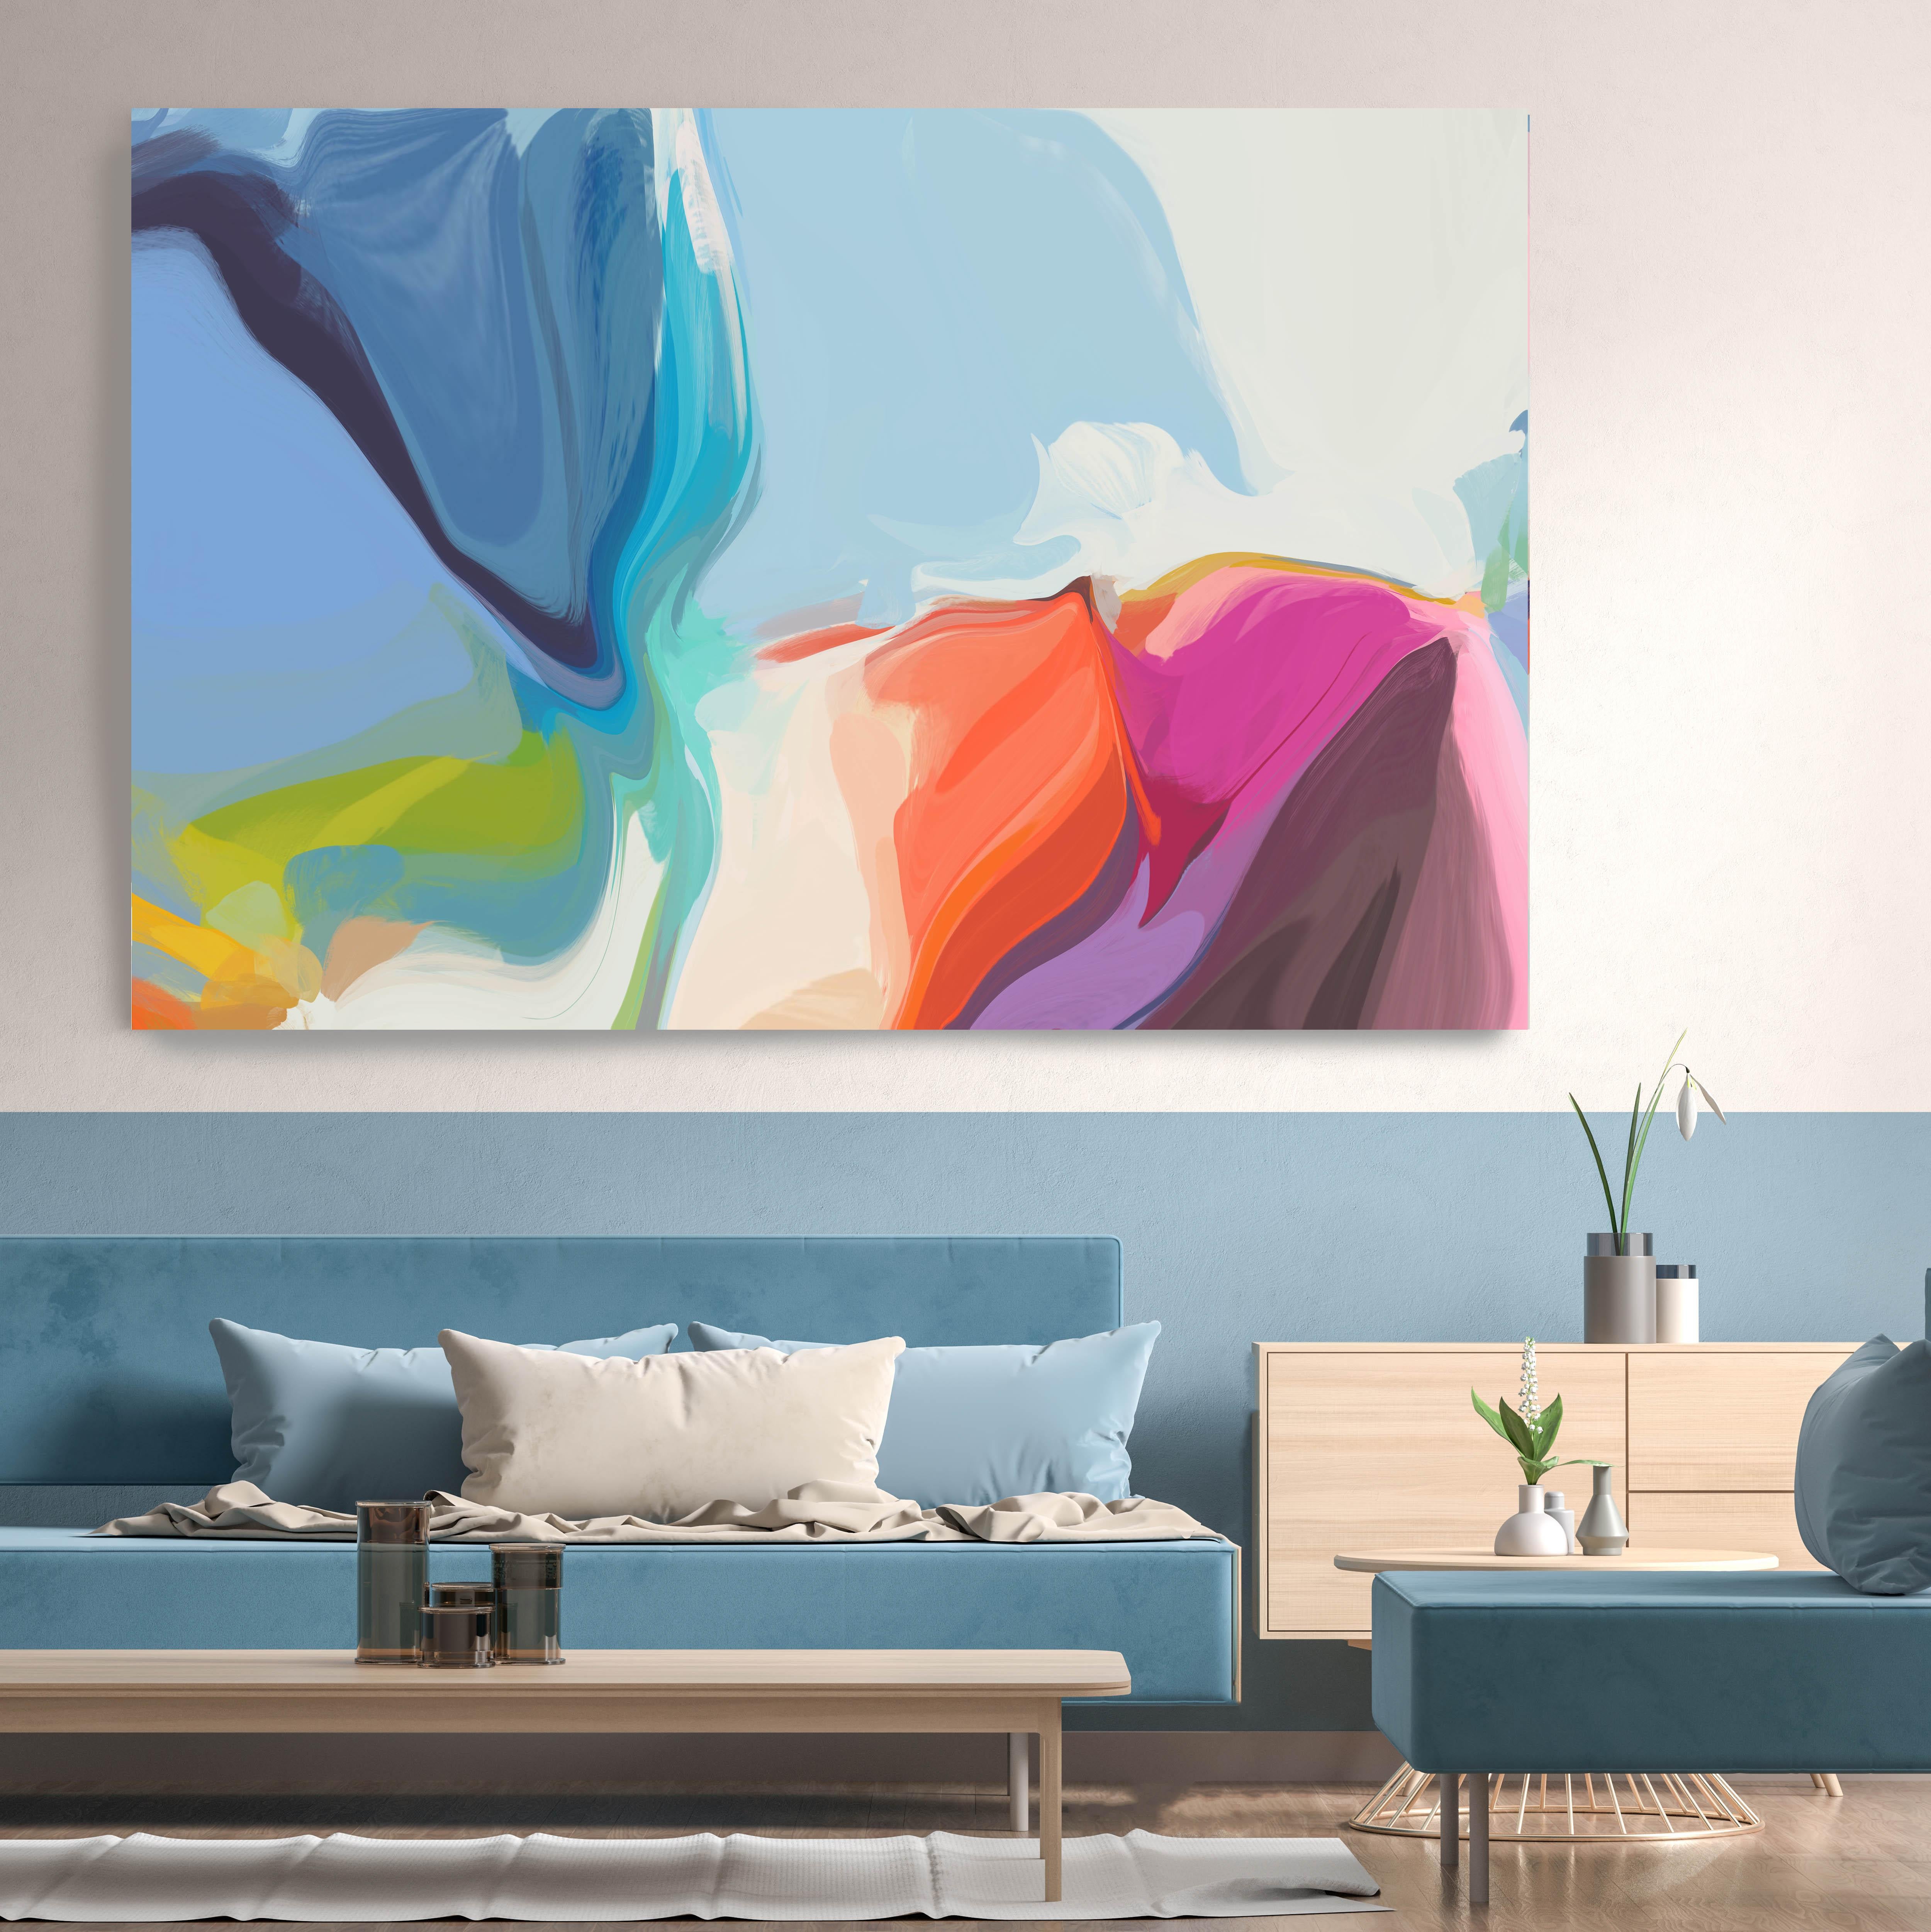 Irena Orlov Abstract Painting - Abstract Blue Painting Mixed Media Canvas 40x60" The cheerful voice